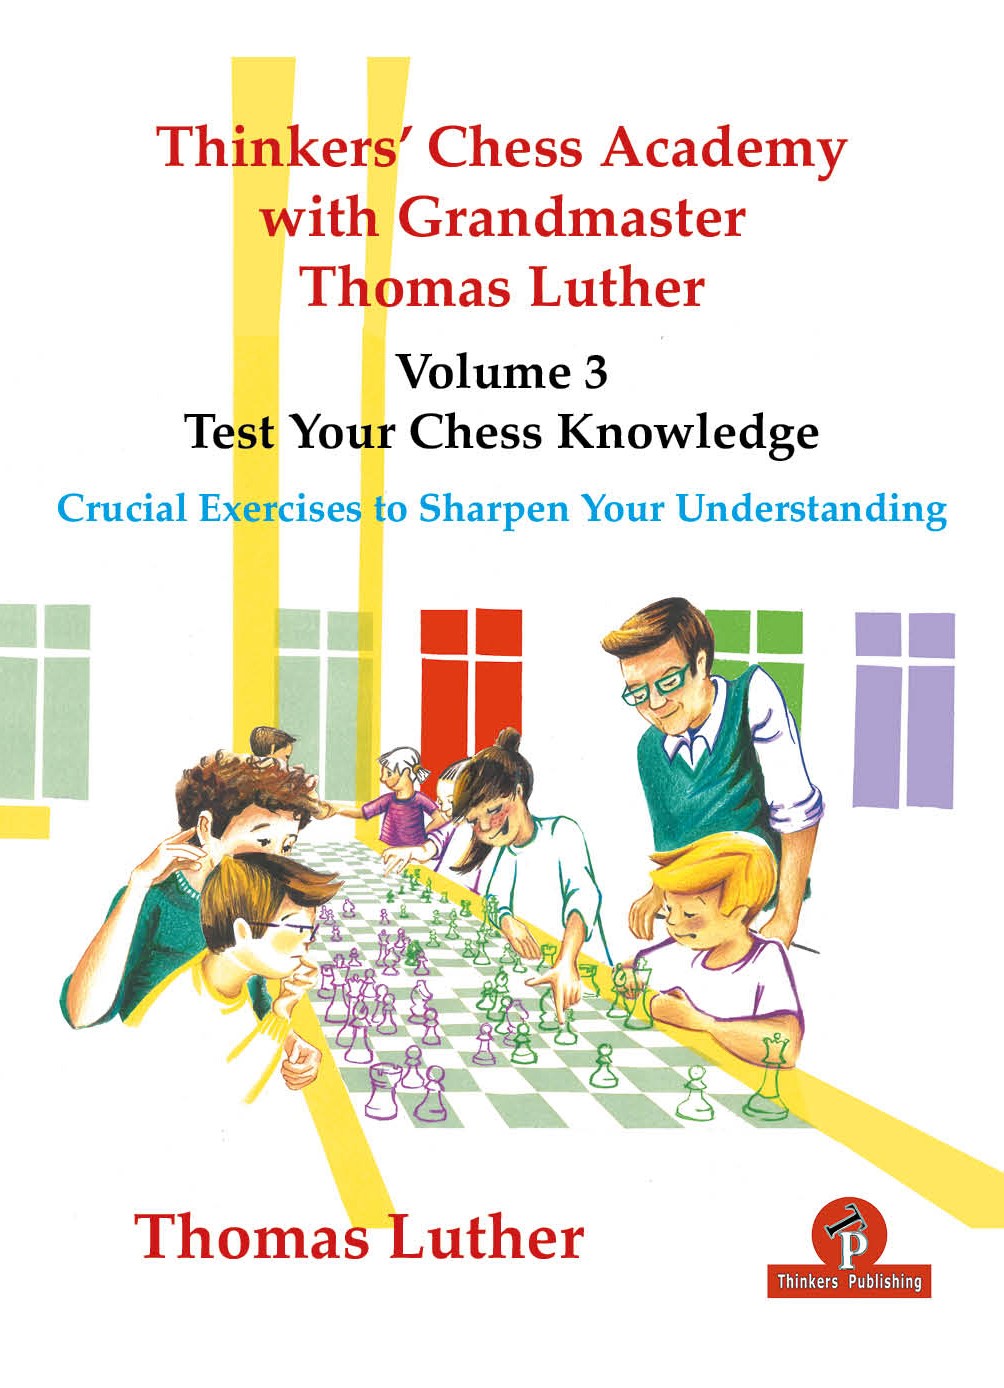 Thinkers Chess Academy Volume 3 – Test your chess knowledge – Crucial exercises to sharpen your understanding.